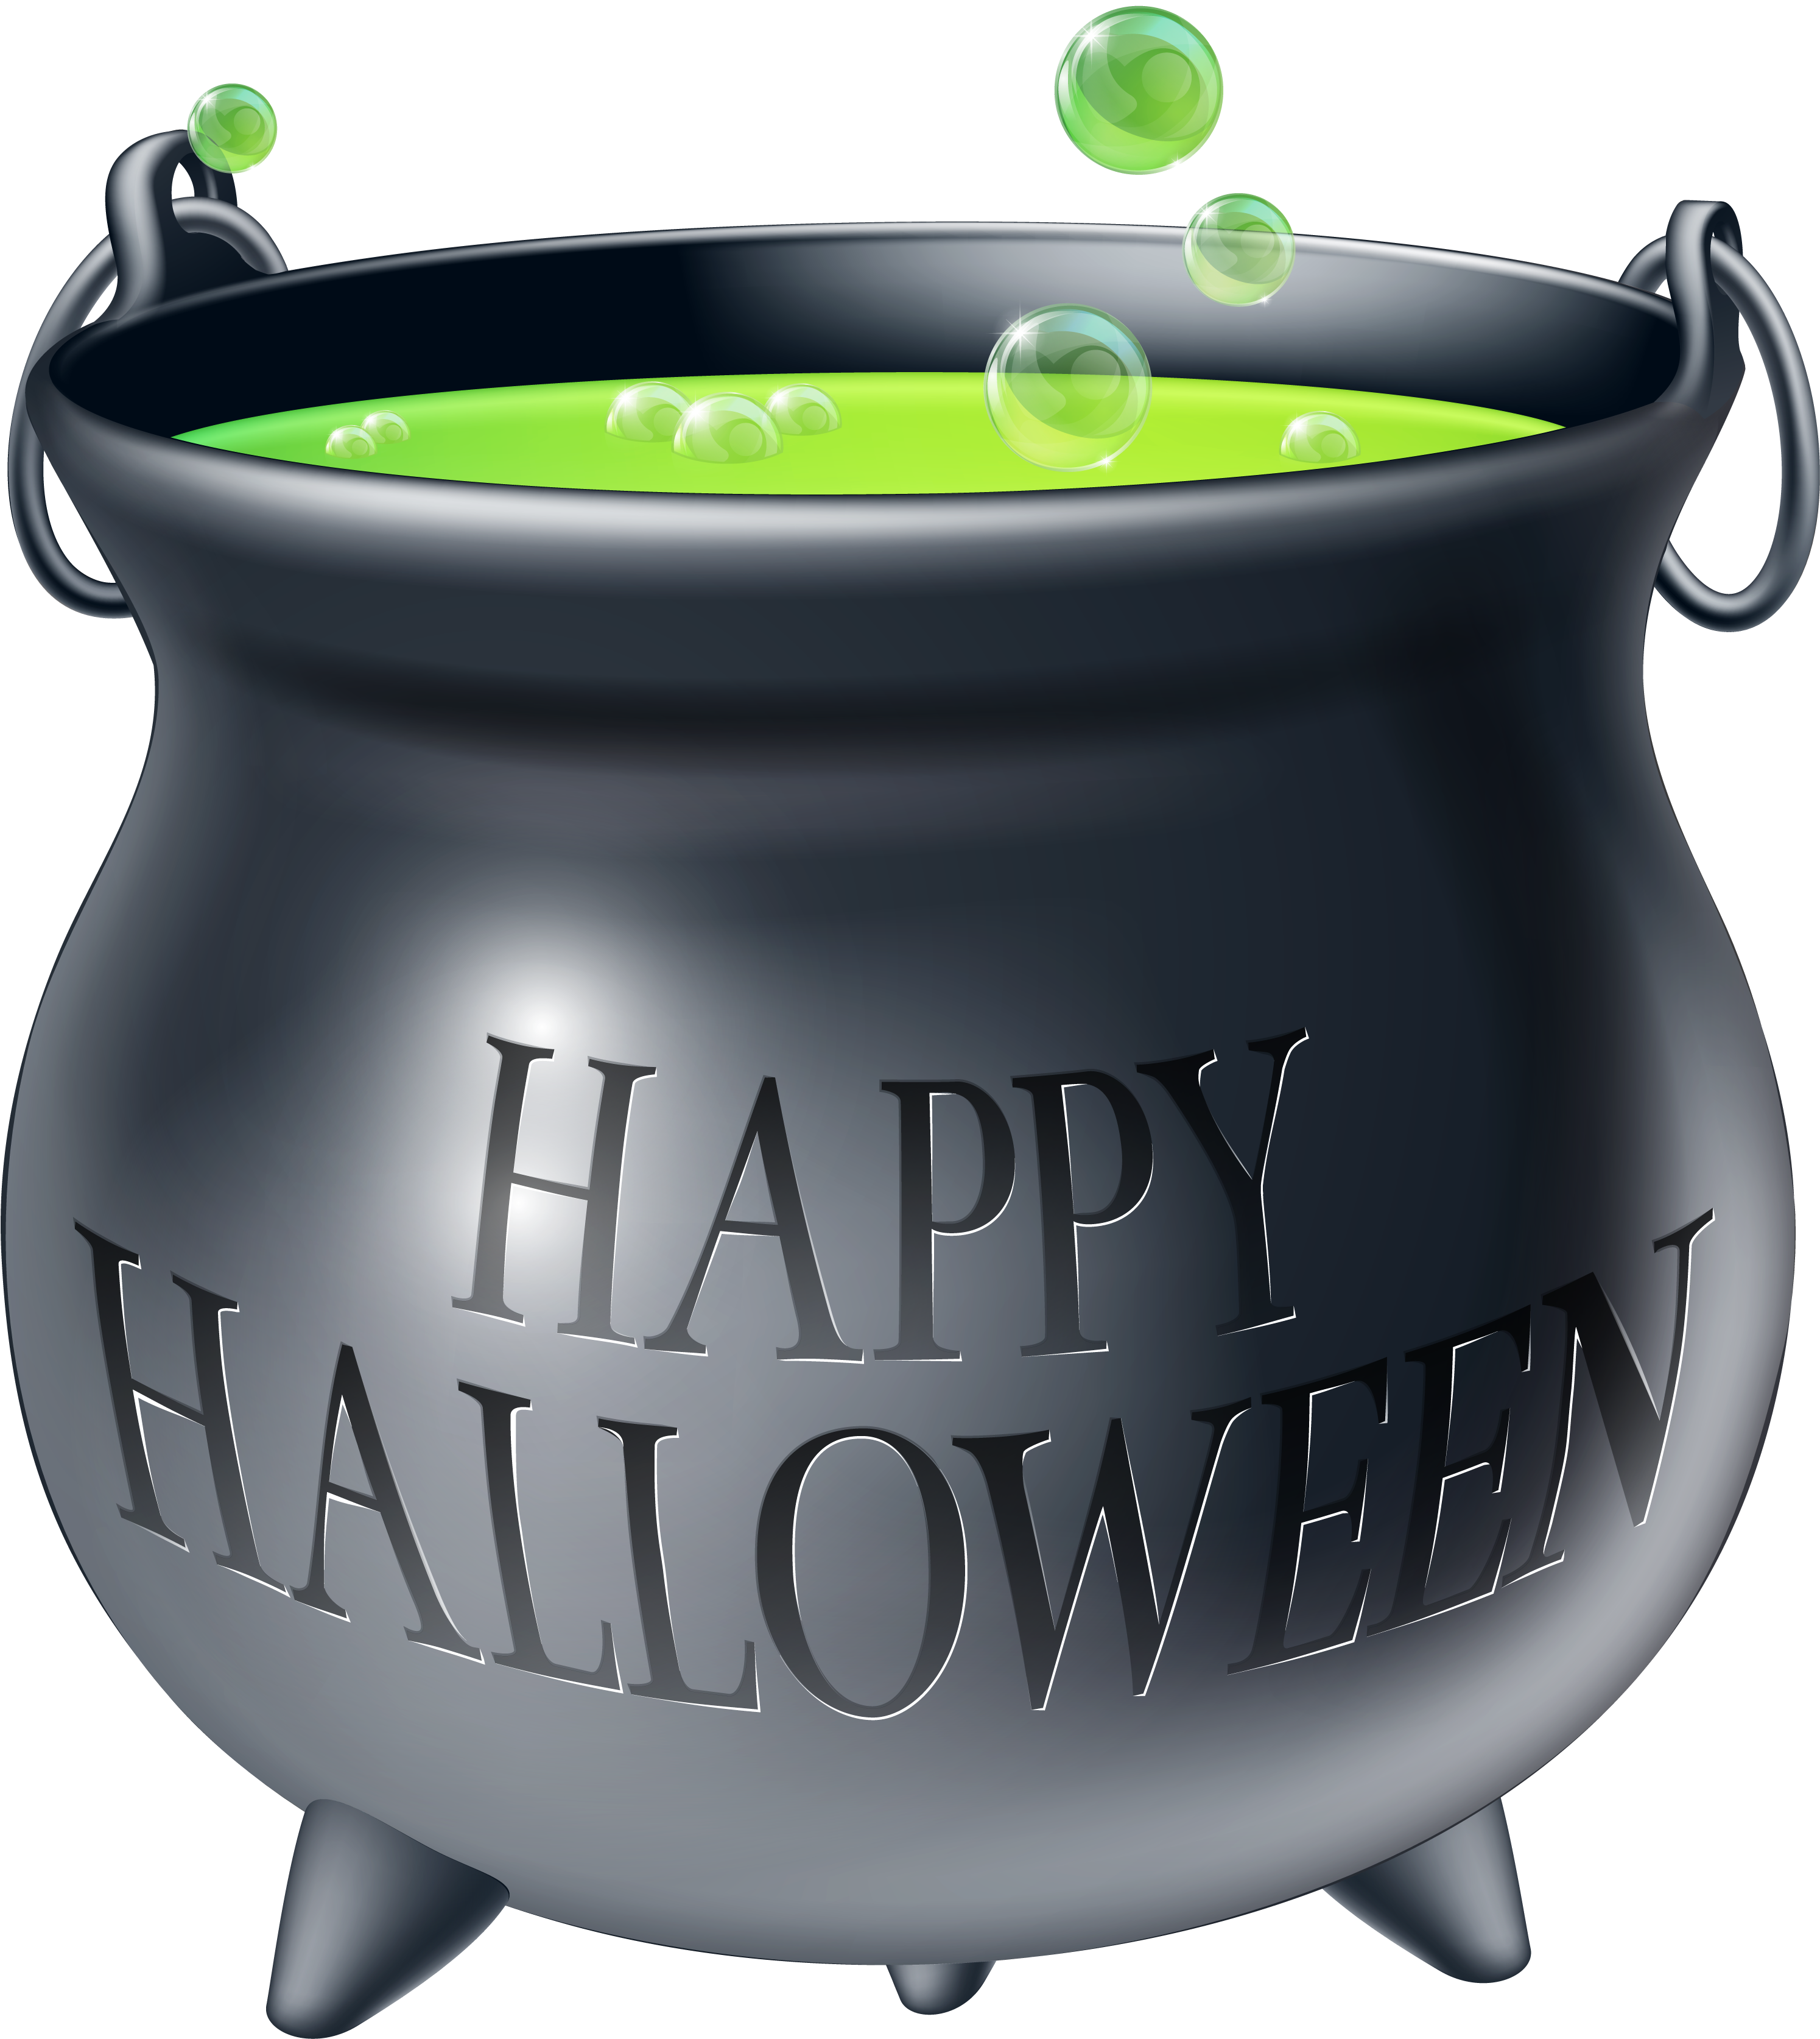 A Cauldron With Green Liquid And Bubbles